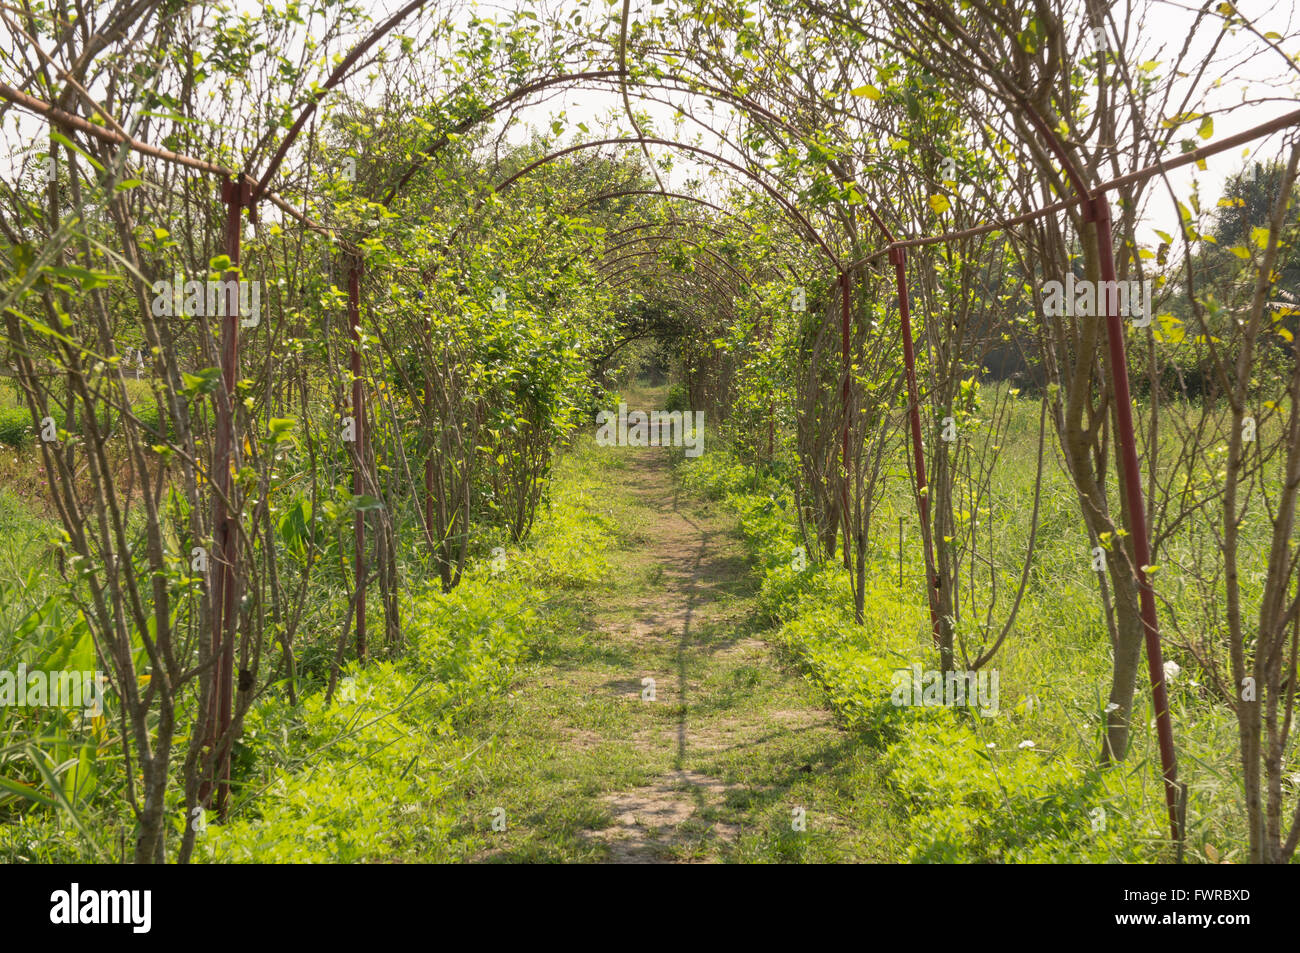 curved trees path walkway in garden Stock Photo